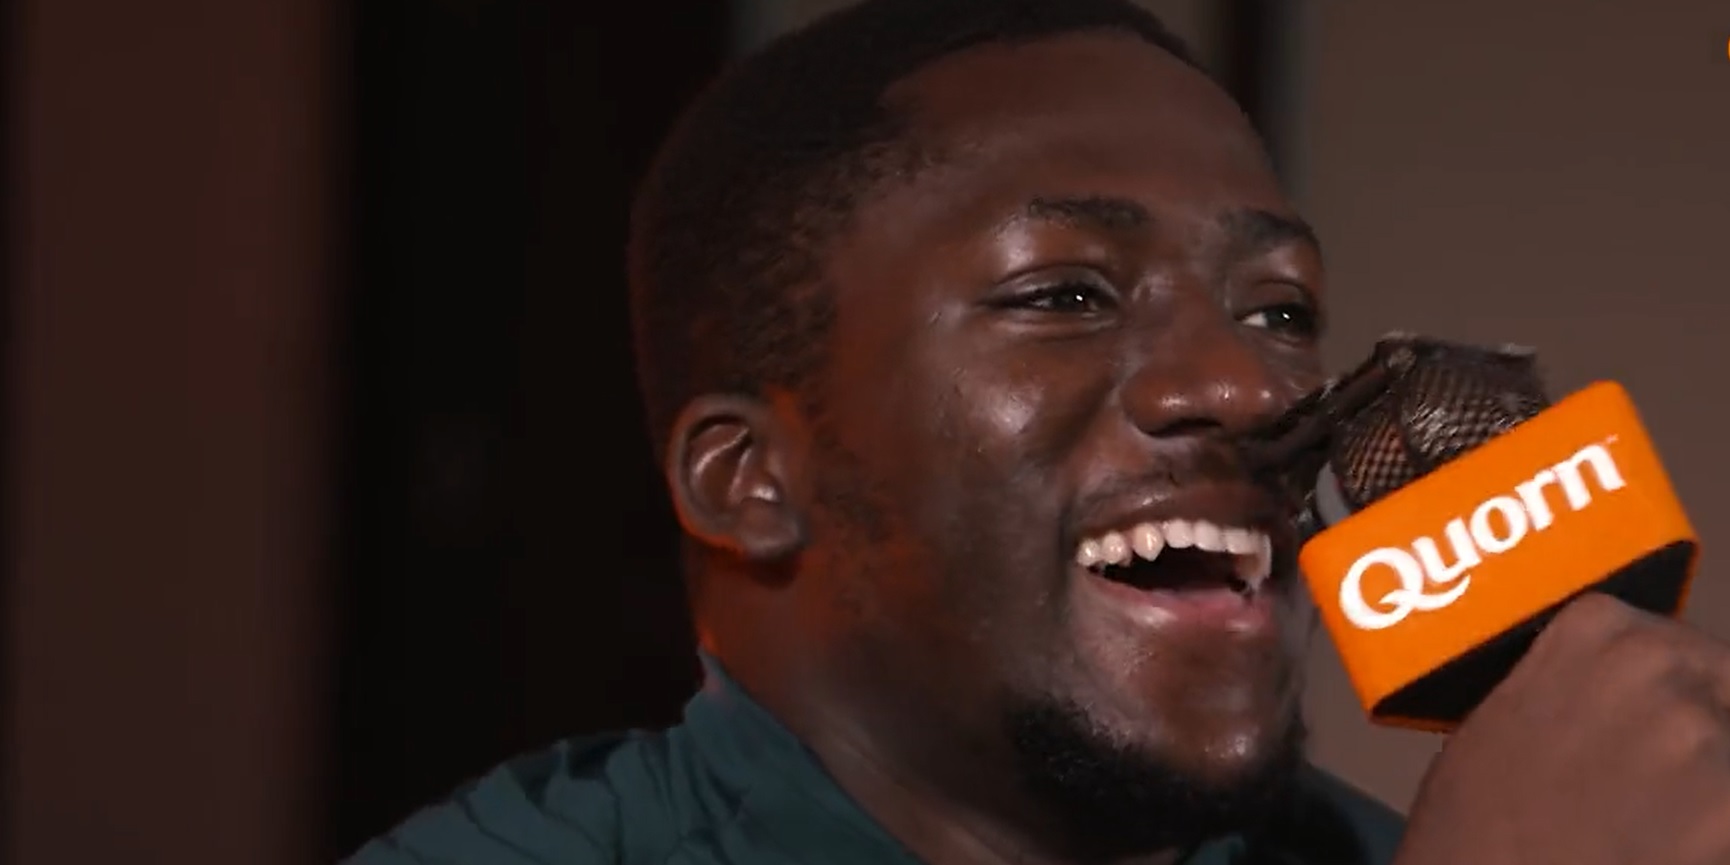 (Video) ‘Oh my god’ – Konate in awe of ‘man of the match’ performance from Liverpool teammate during Old Trafford thrashing